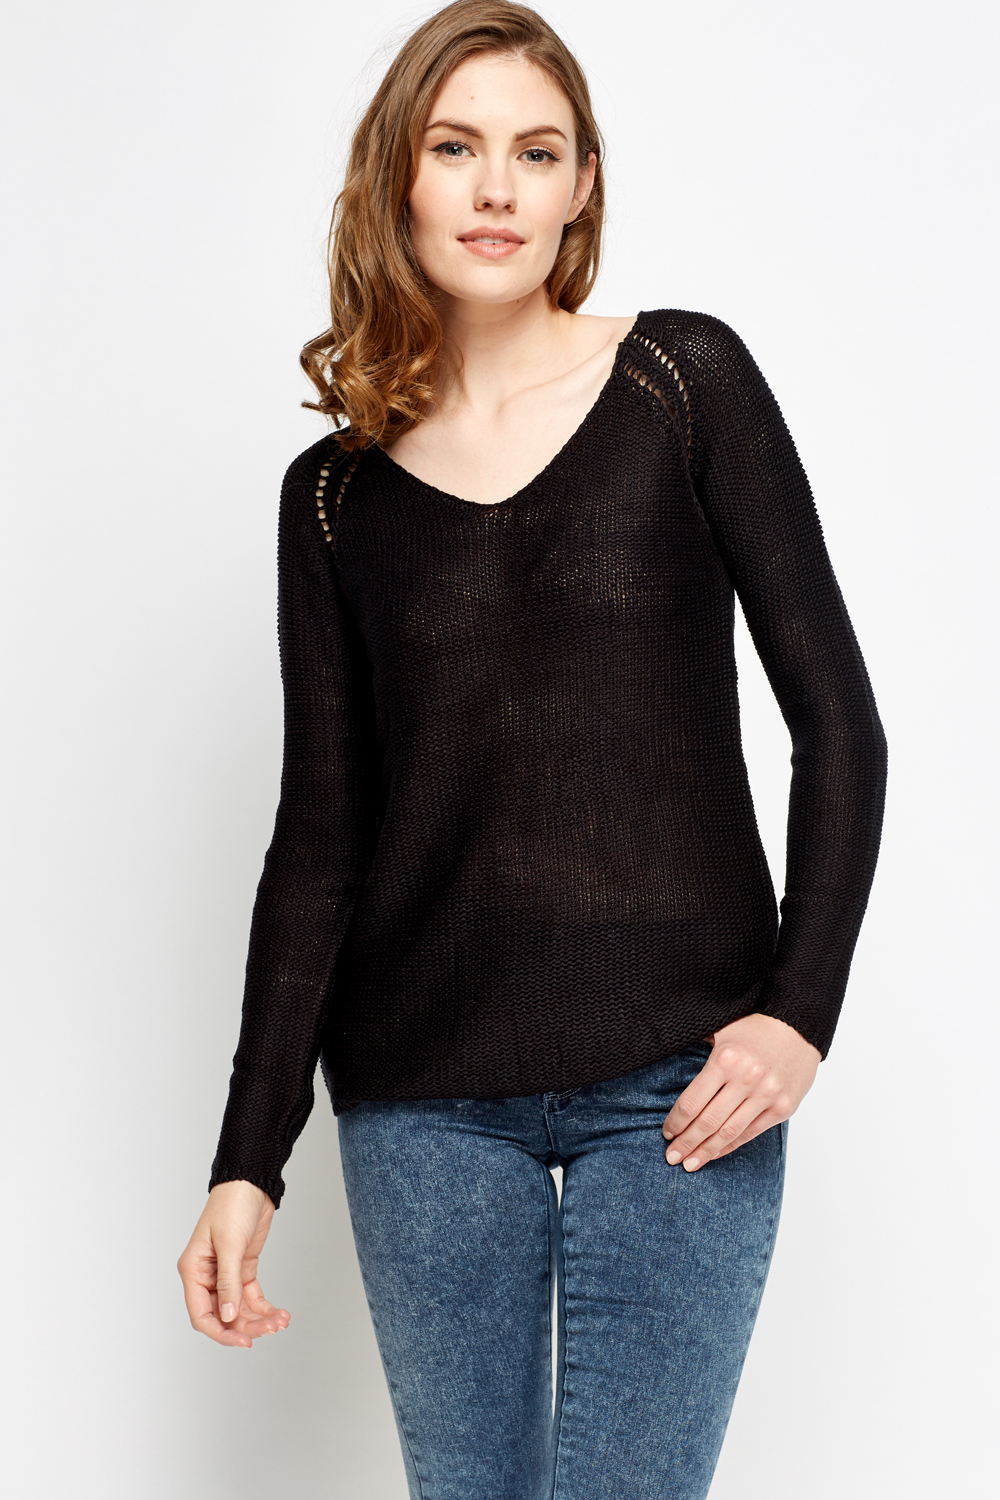 Perforated Laser Cut Jumper - Just $7